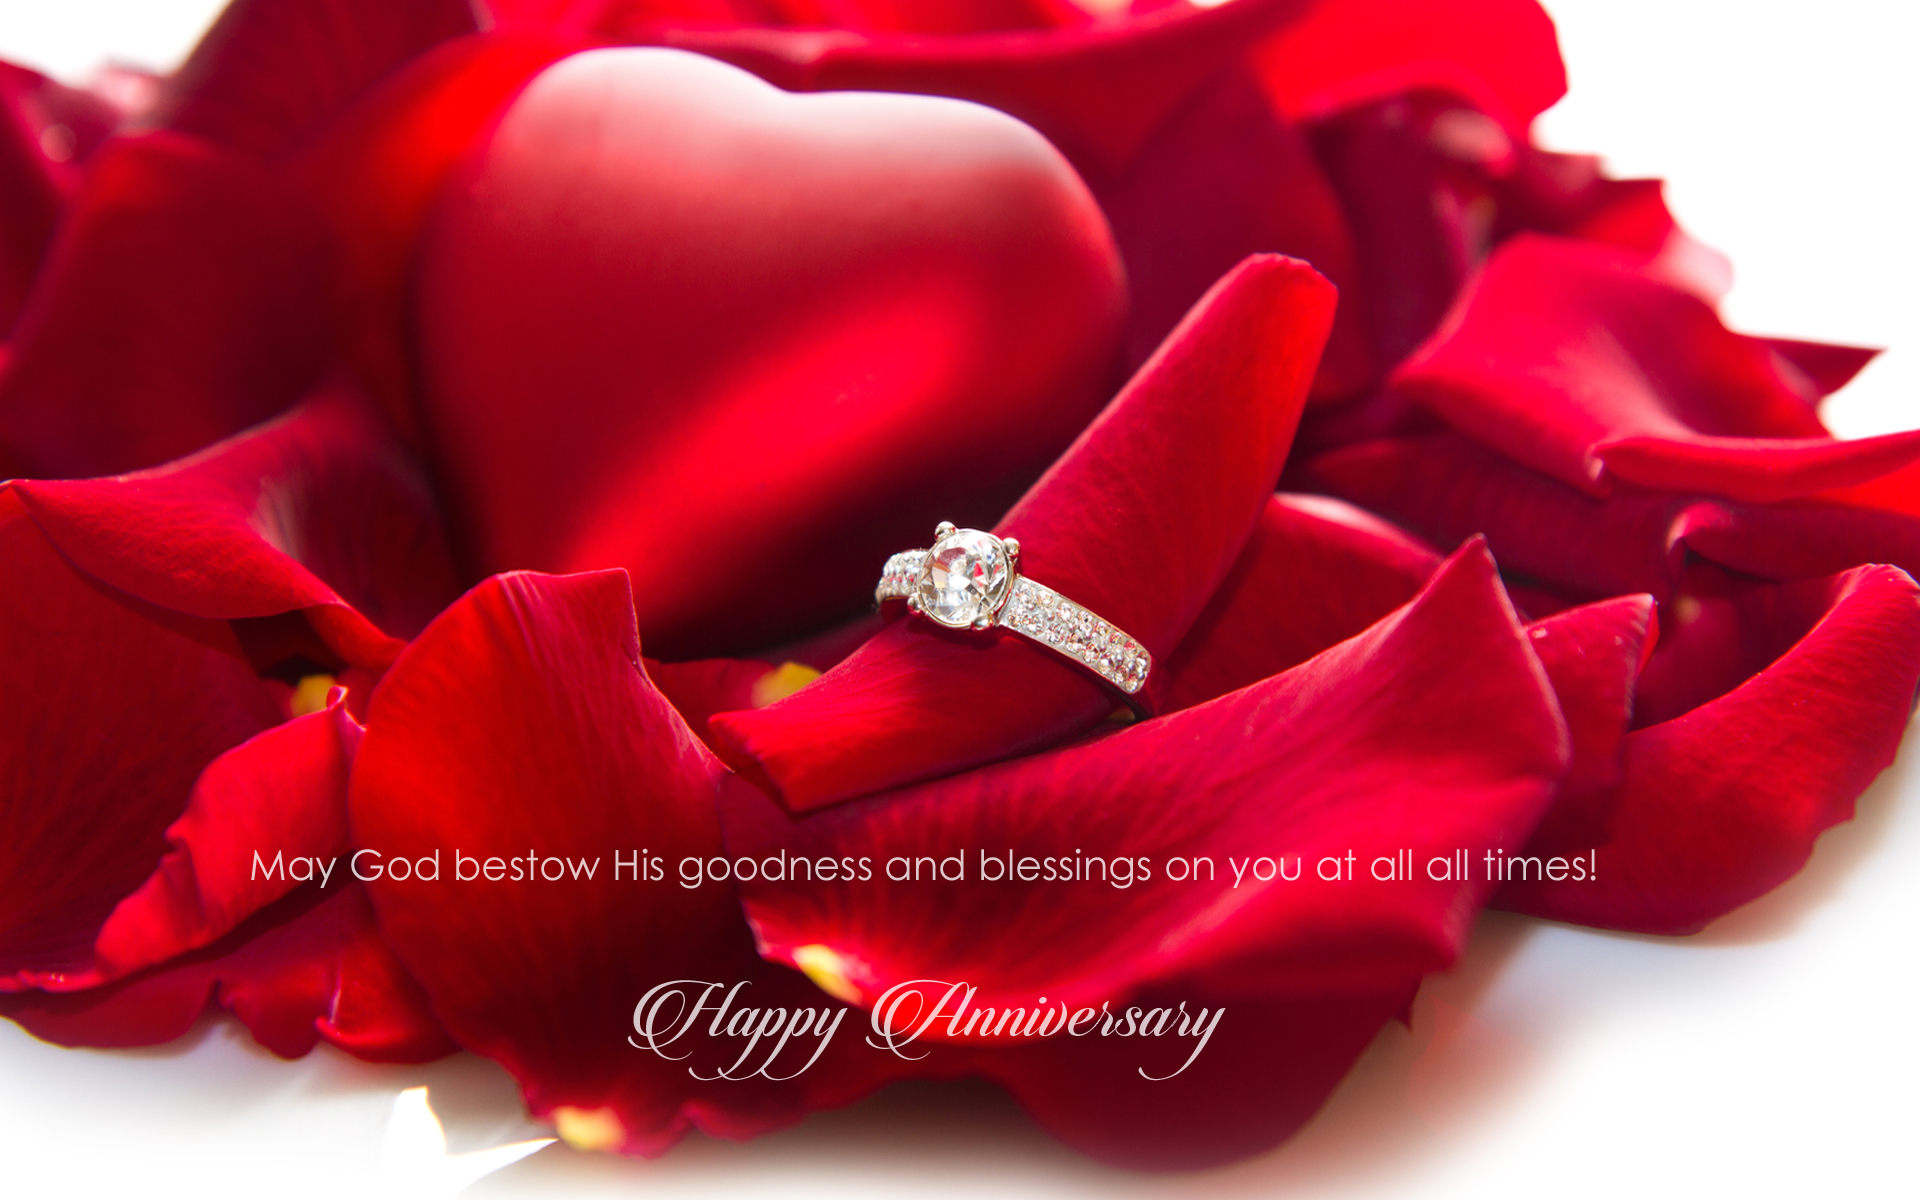 holiday, anniversary, flower, heart, ring